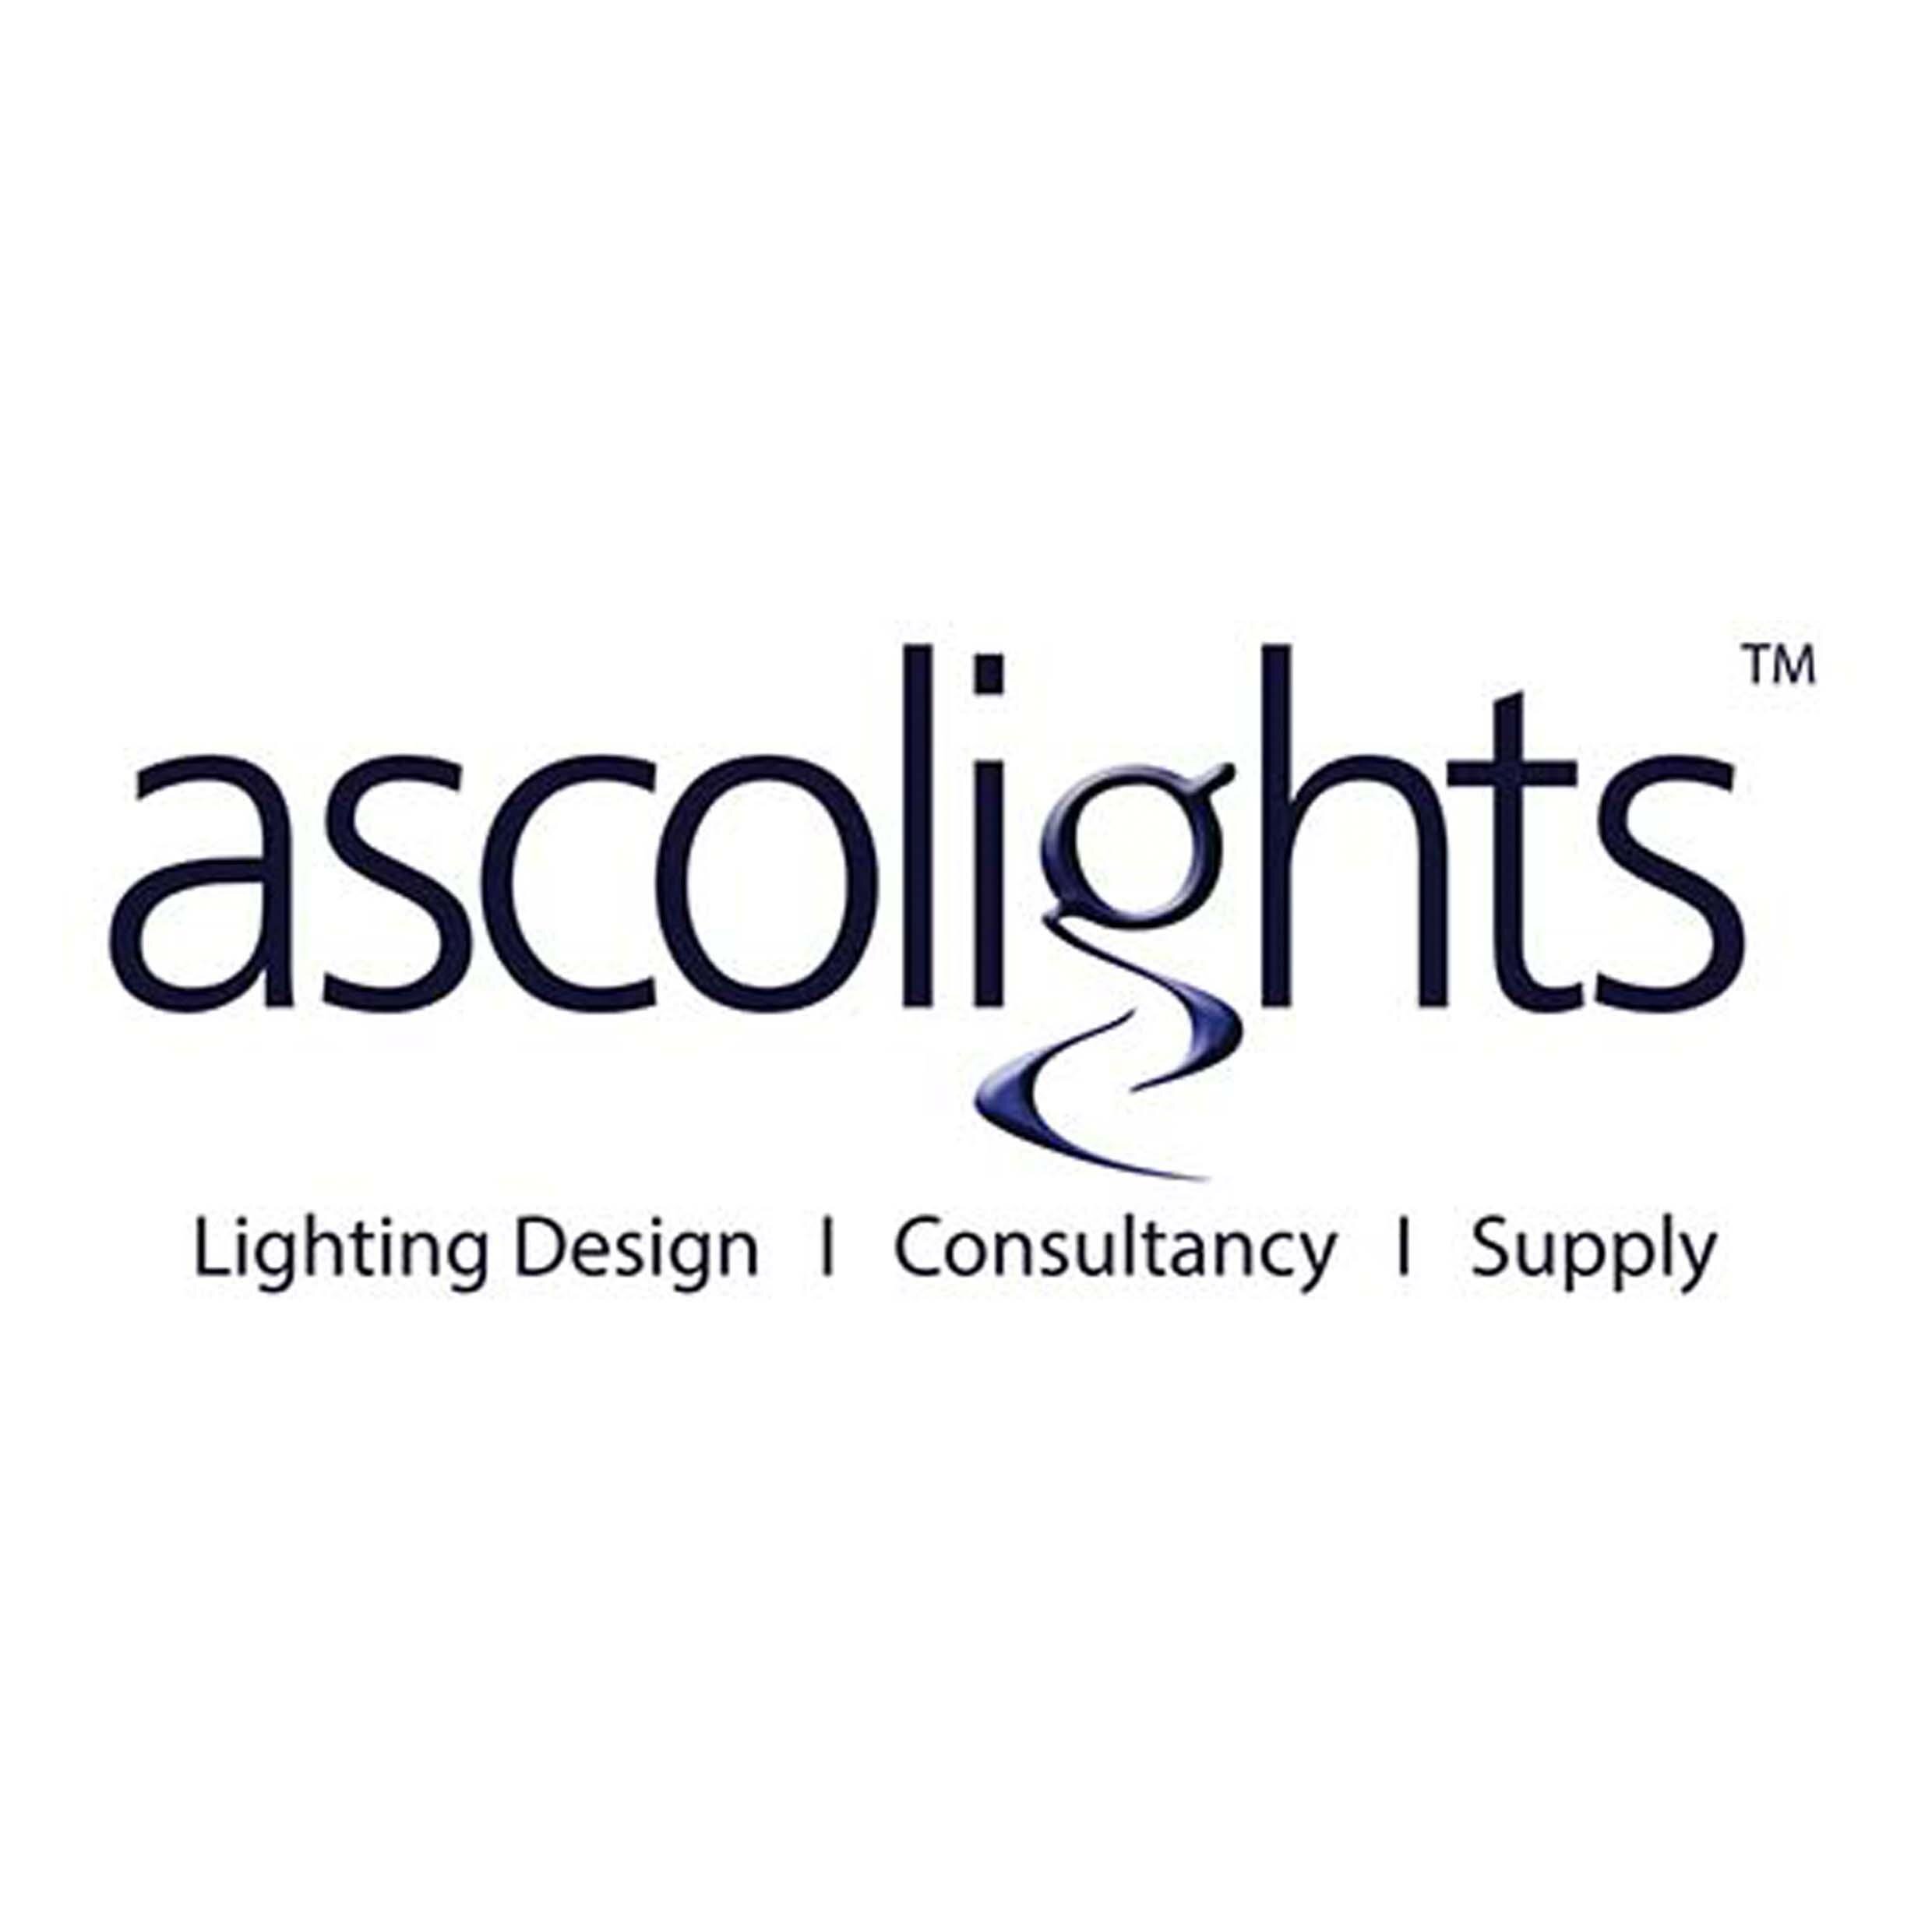 Lifestyle by Asco Lights provides Lighting Design, Consultancy & Supply. Offices in Cheshire & London. 0161 207 0212

Asco Venue Hire - @AscoVenueHire